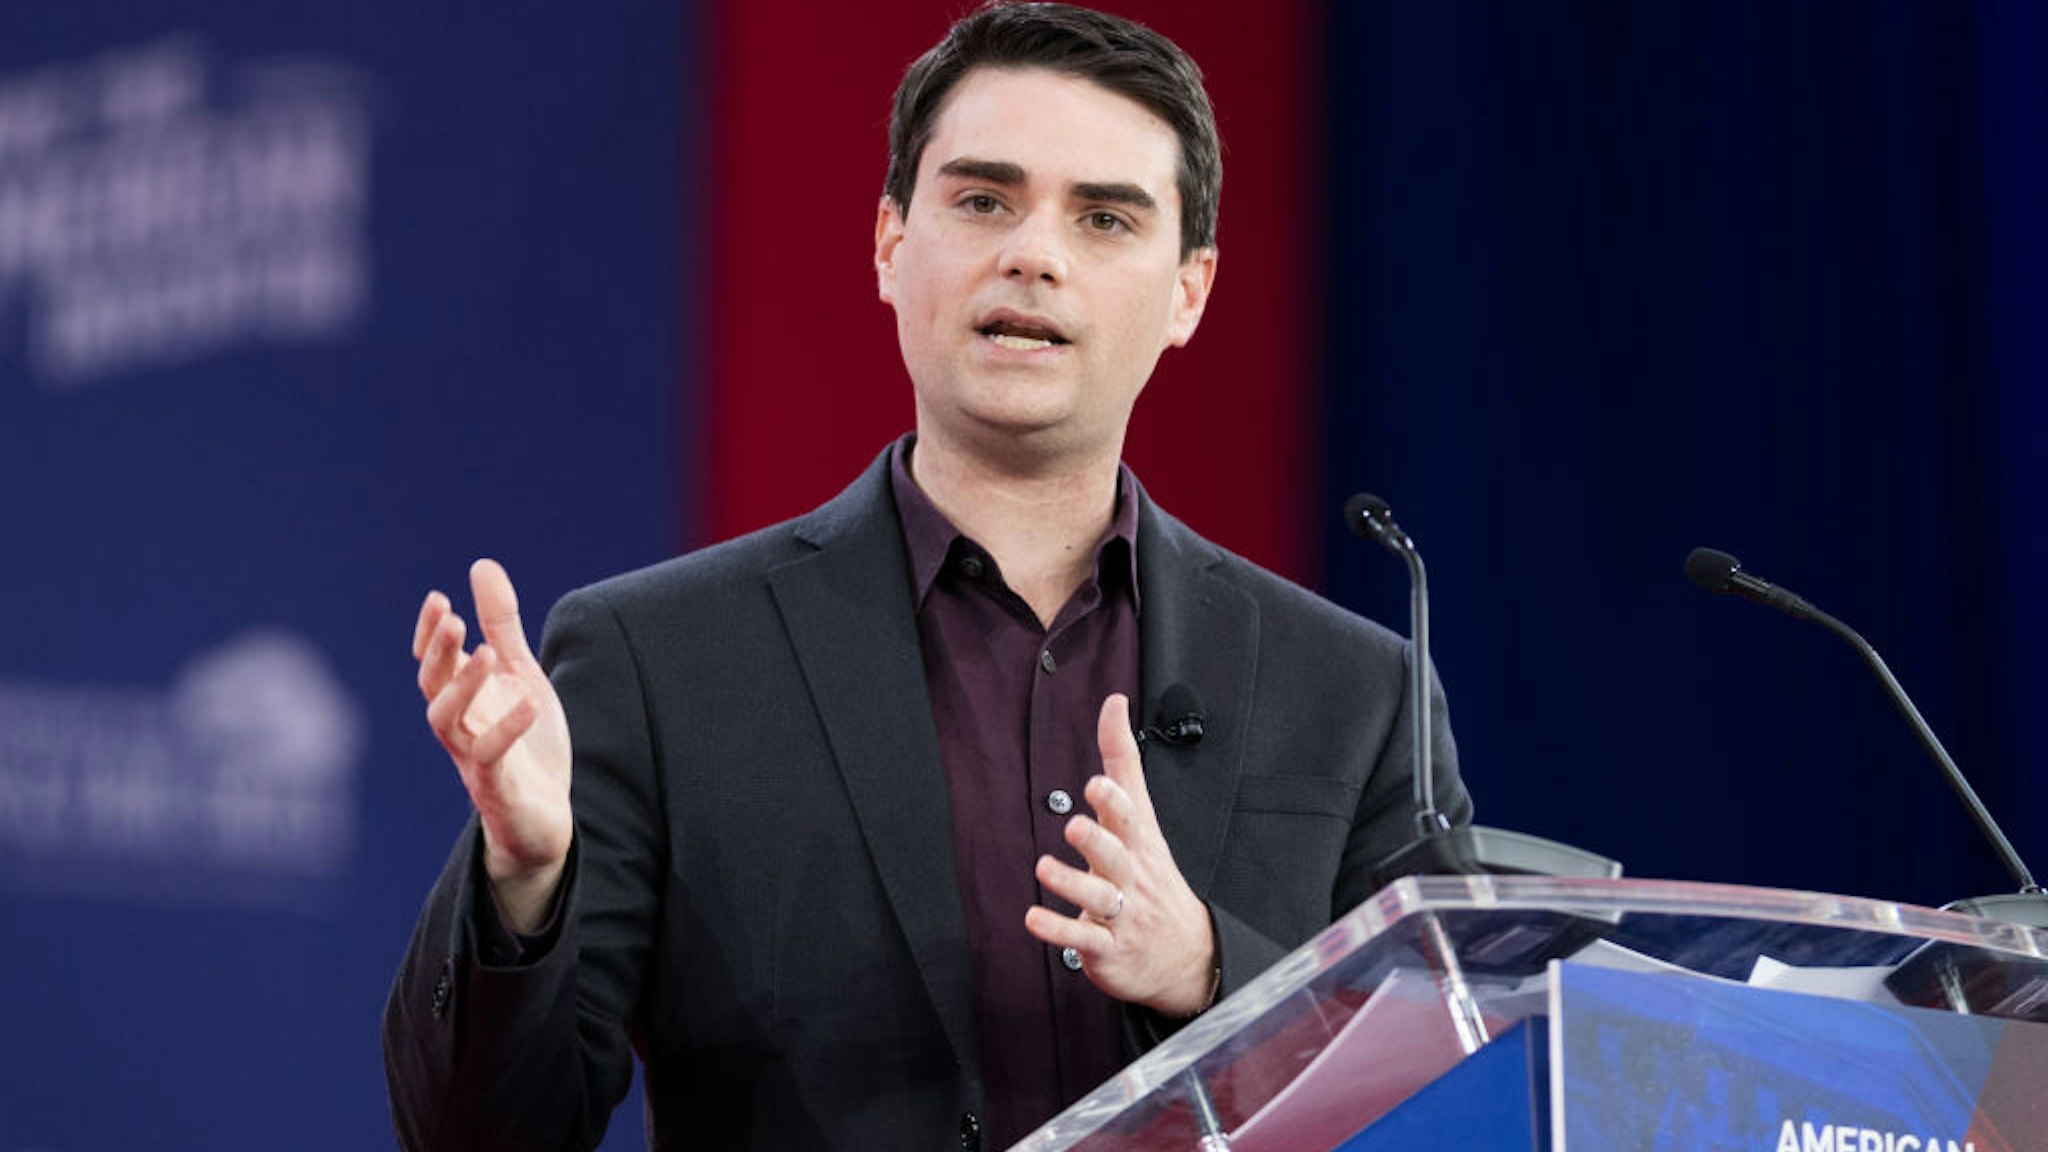 Ben Shapiro, host of his online political podcast The Ben Shapiro Show, at the Conservative Political Action Conference (CPAC) sponsored by the American Conservative Union held at the Gaylord National Resort & Convention Center in Oxon Hill.